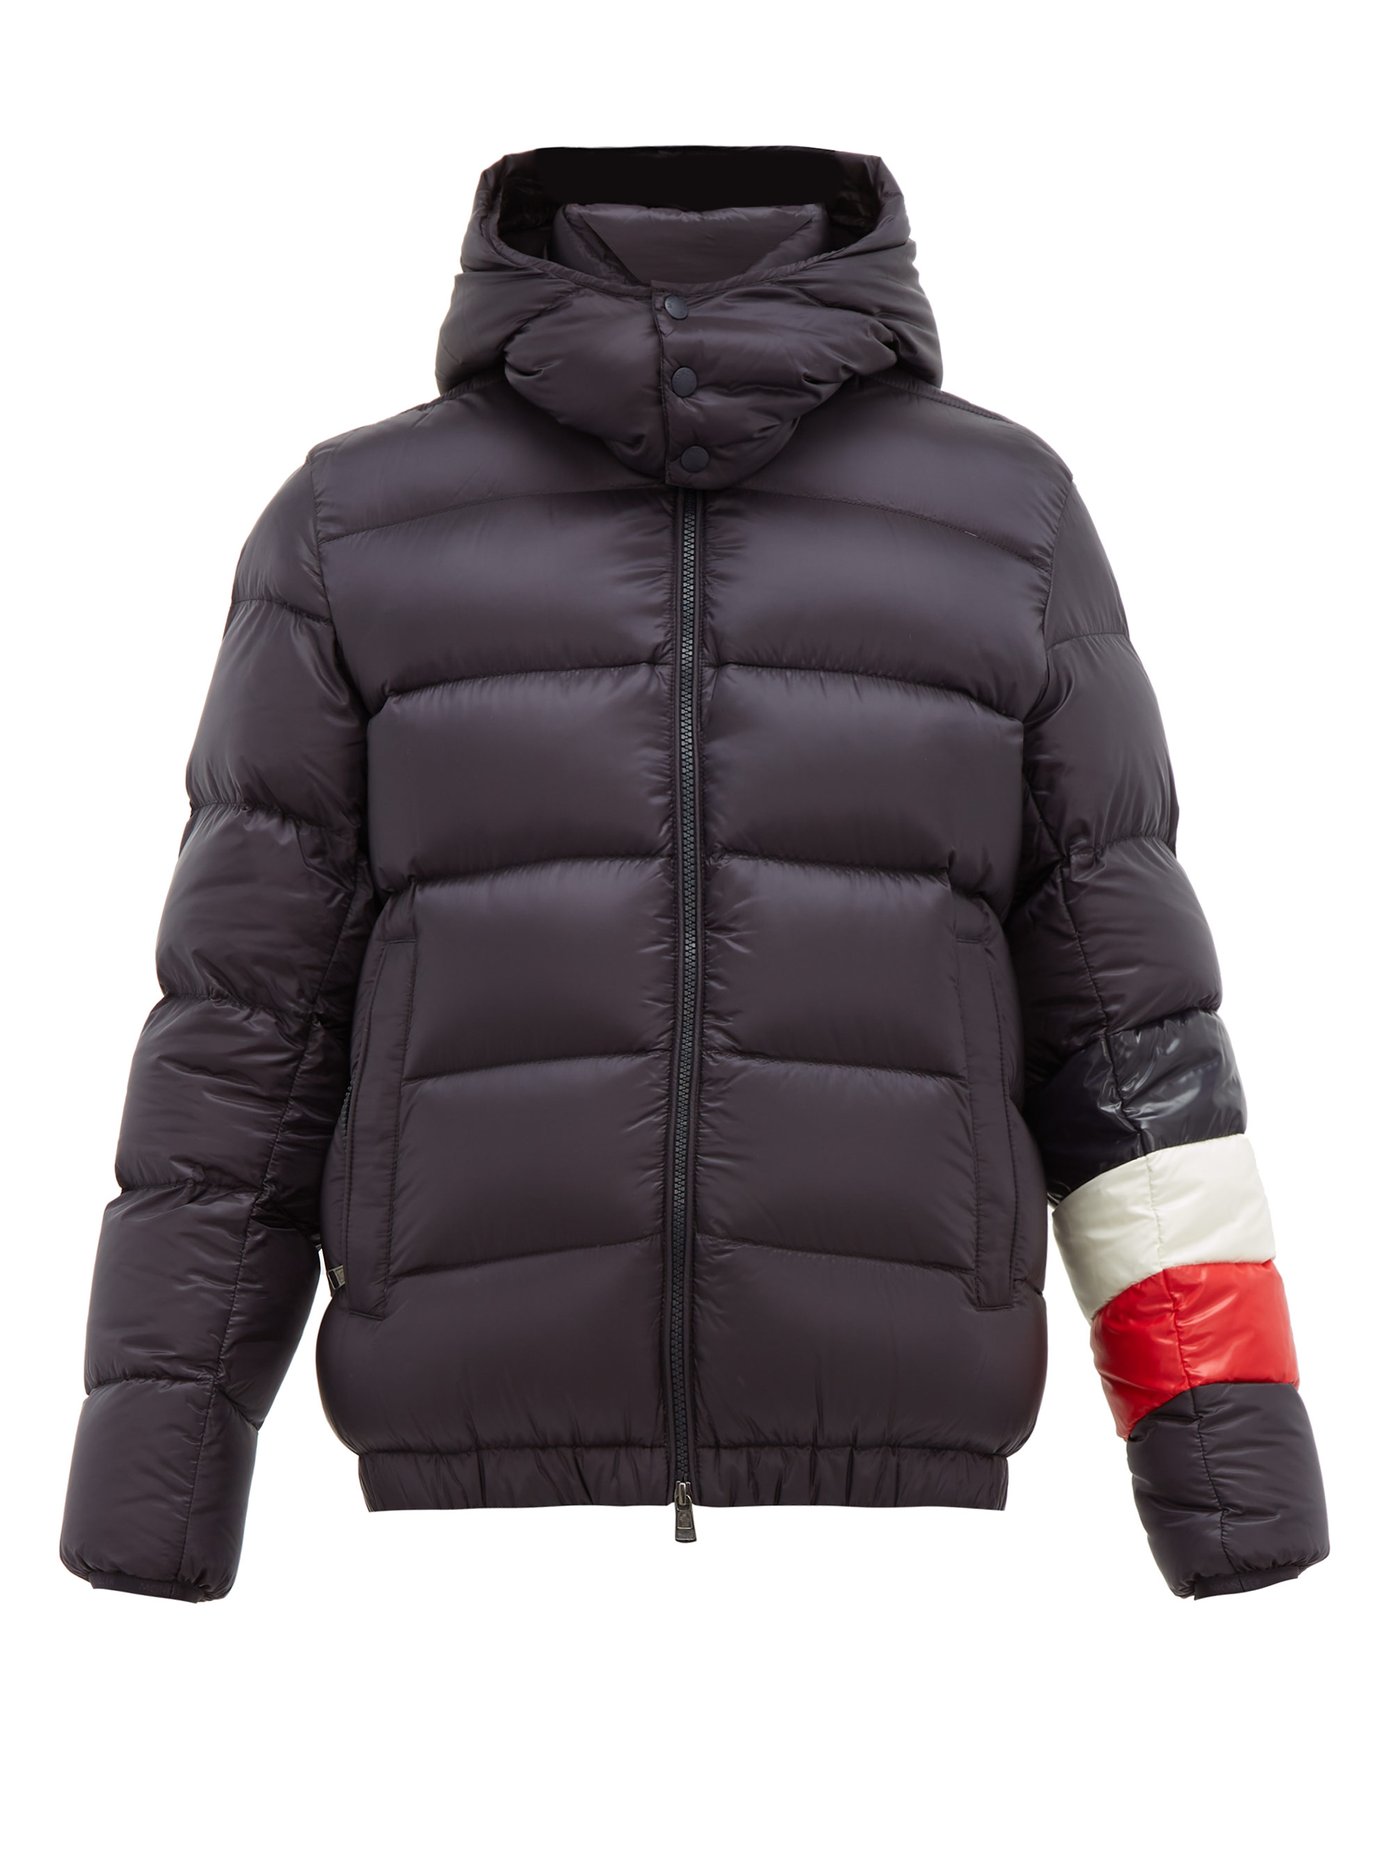 moncler size 5 in us